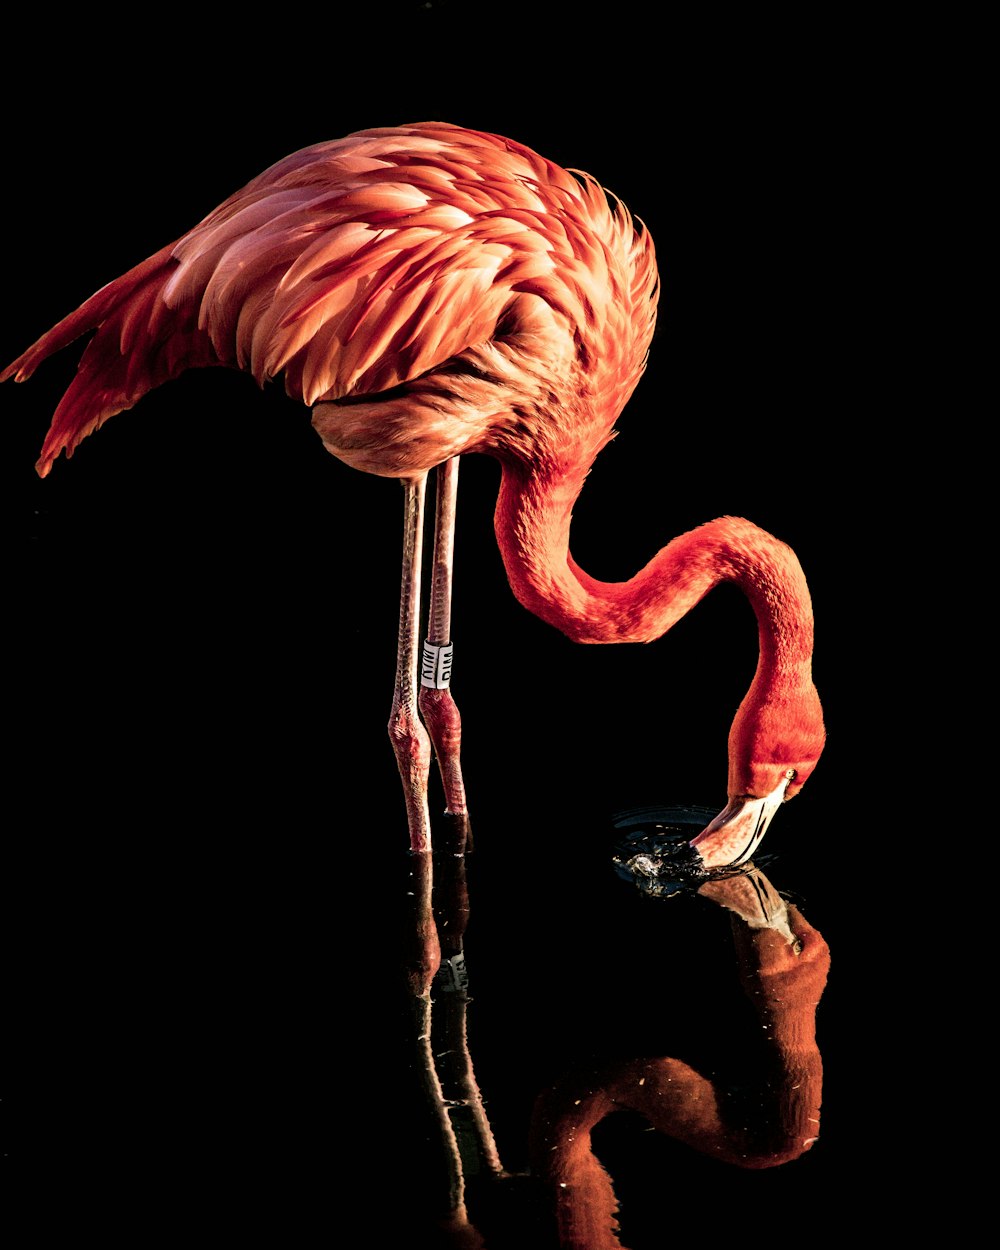 a pink flamingo standing on a black surface